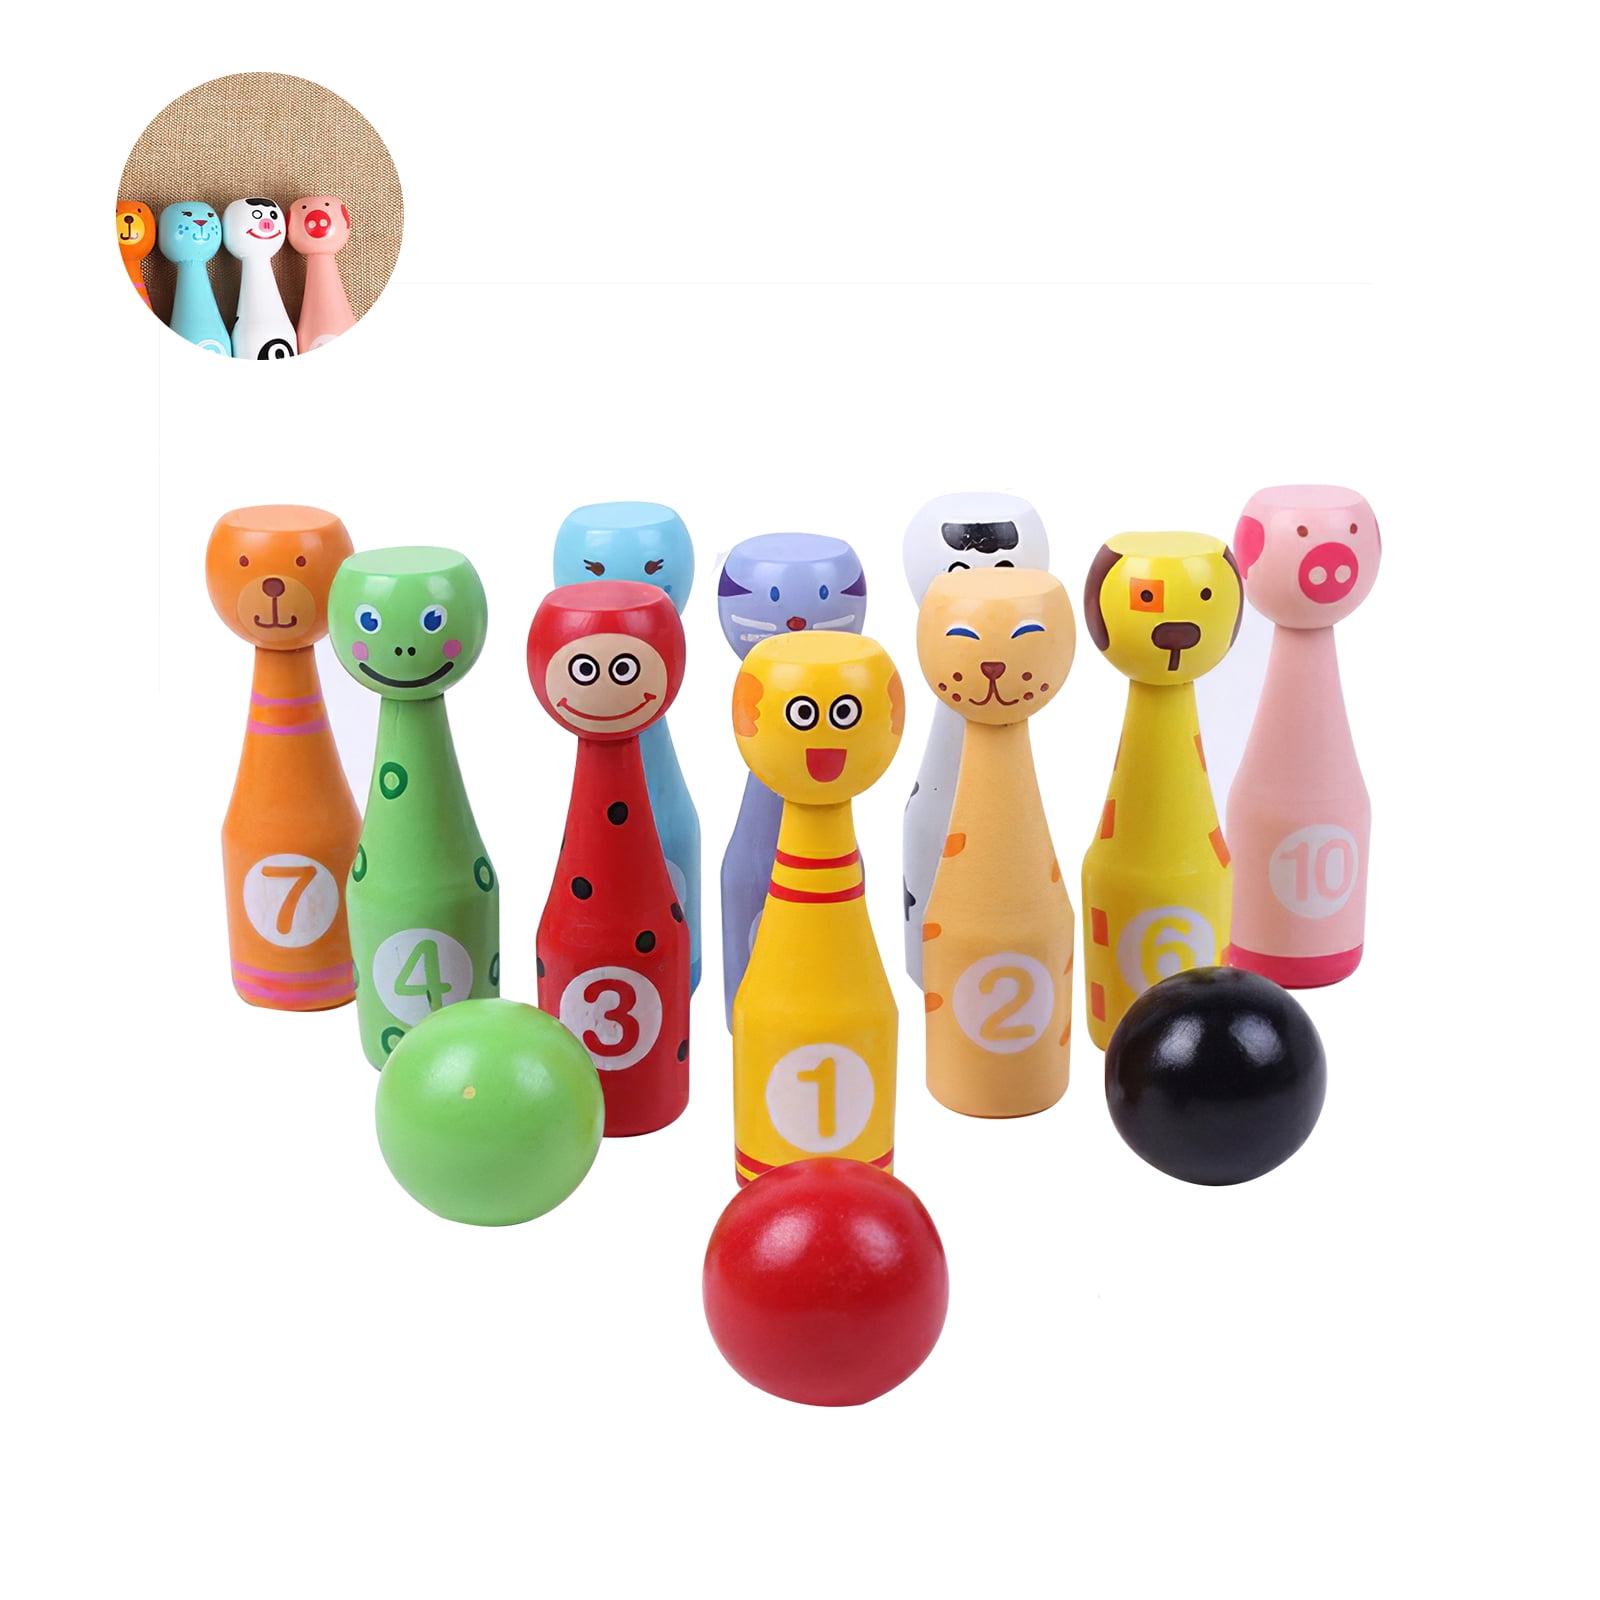 New Wooden Cartoon Animals Bowling Set for Kids 9 Pins 1 Ball Family Fun Game 